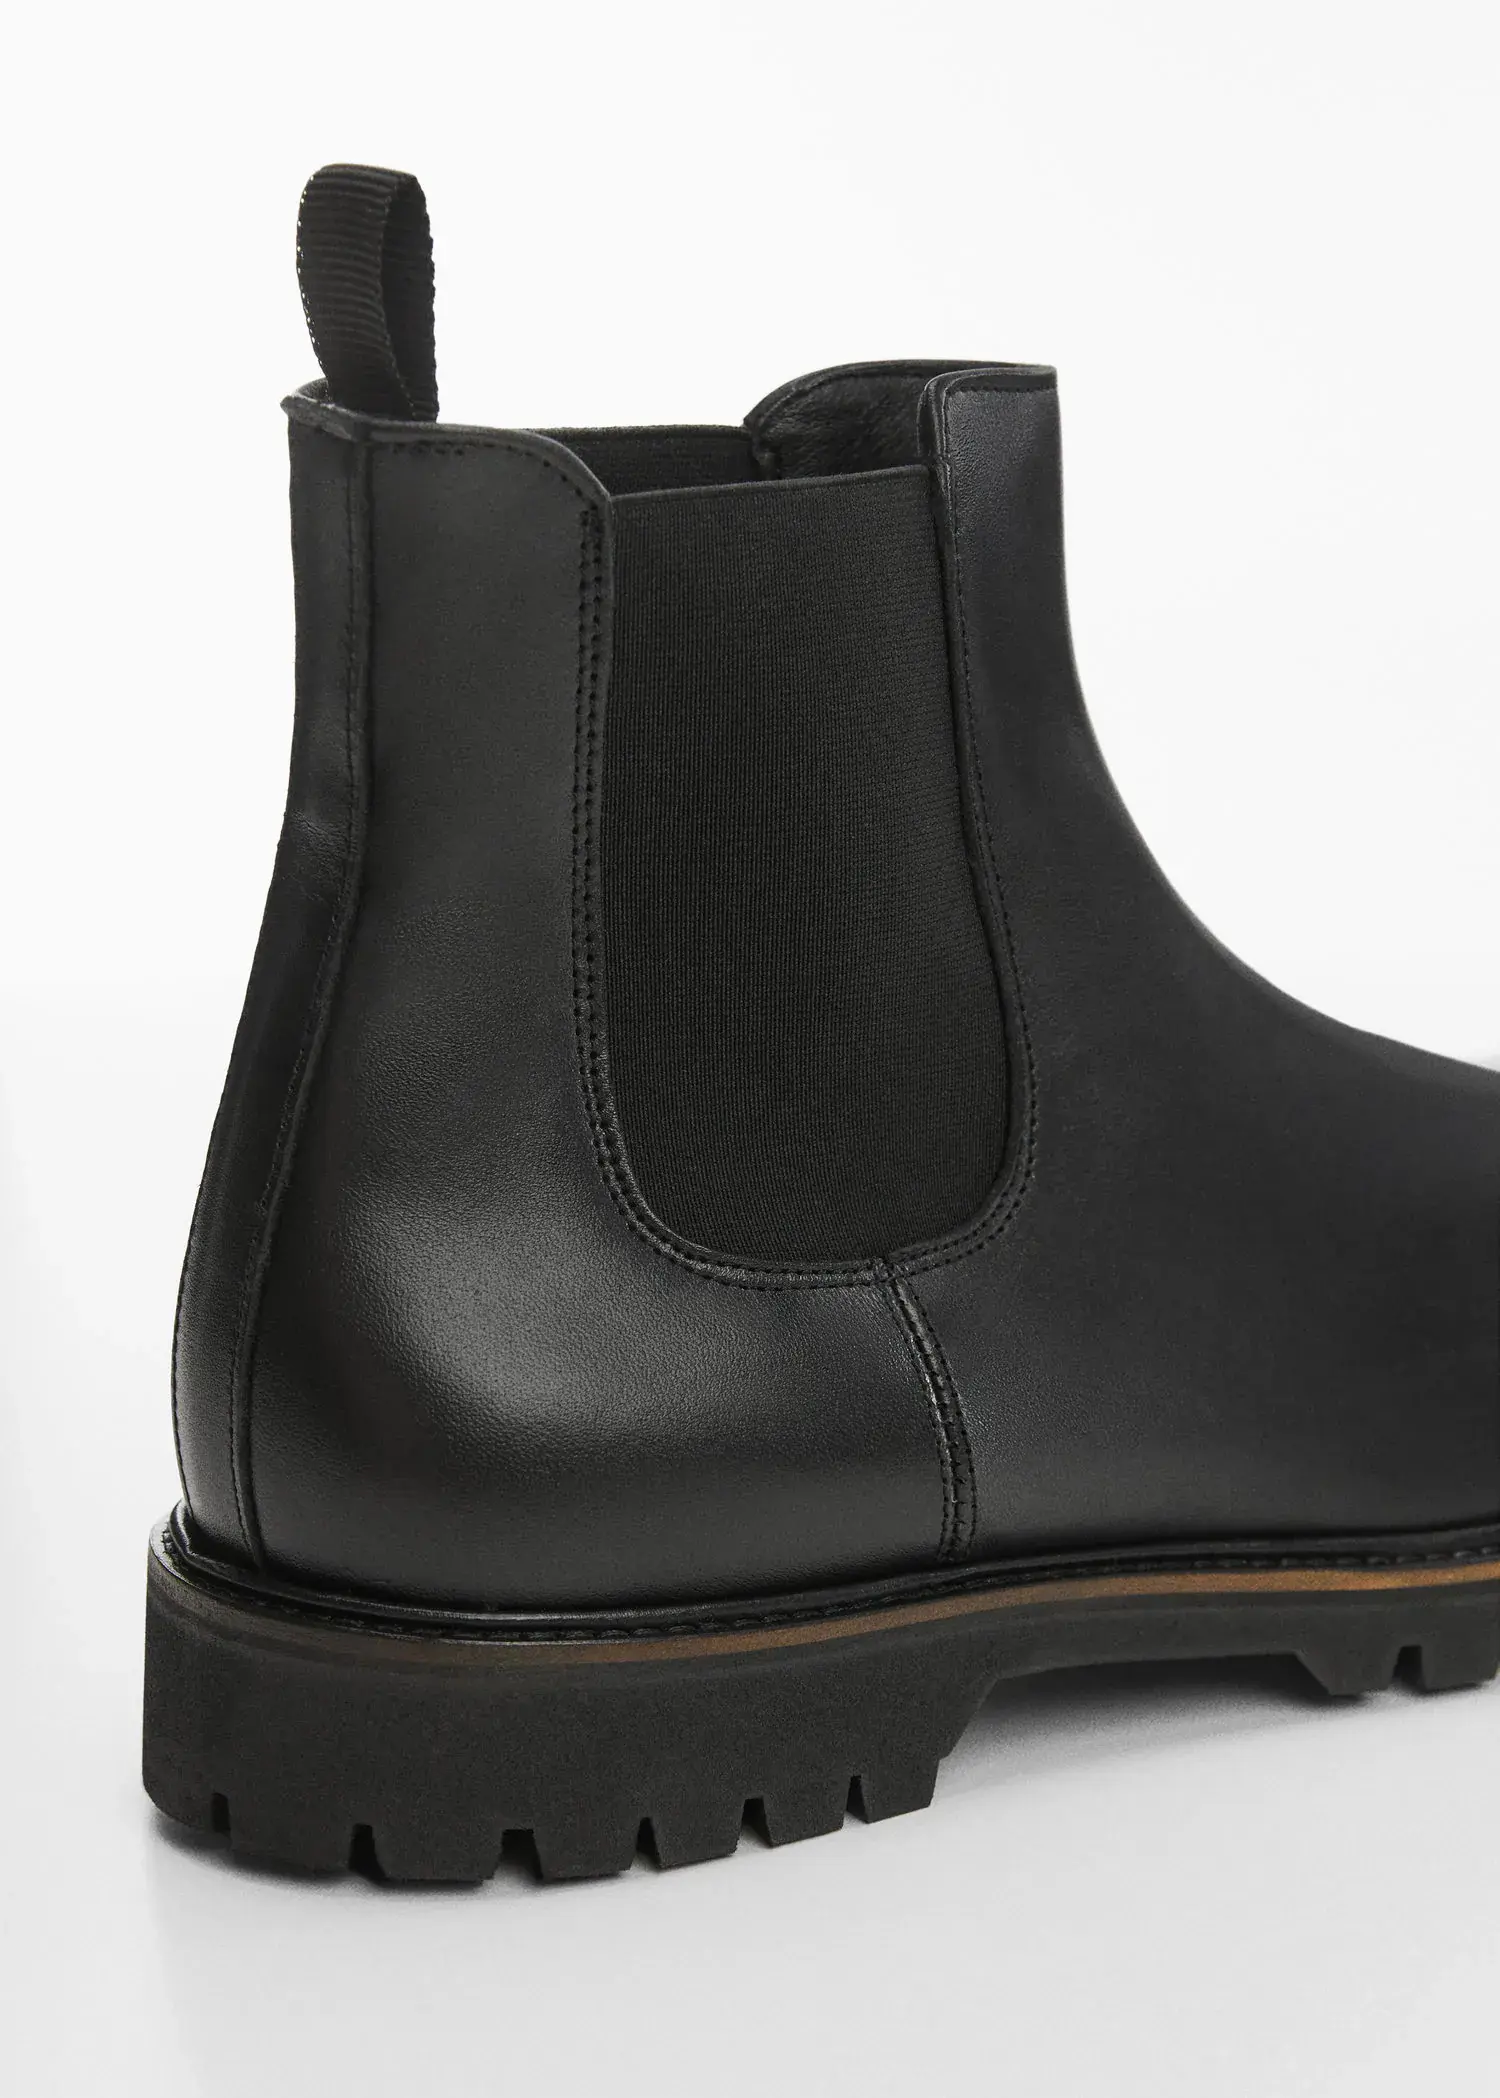 Mango Chelsea leather ankle boots with track sole. 3